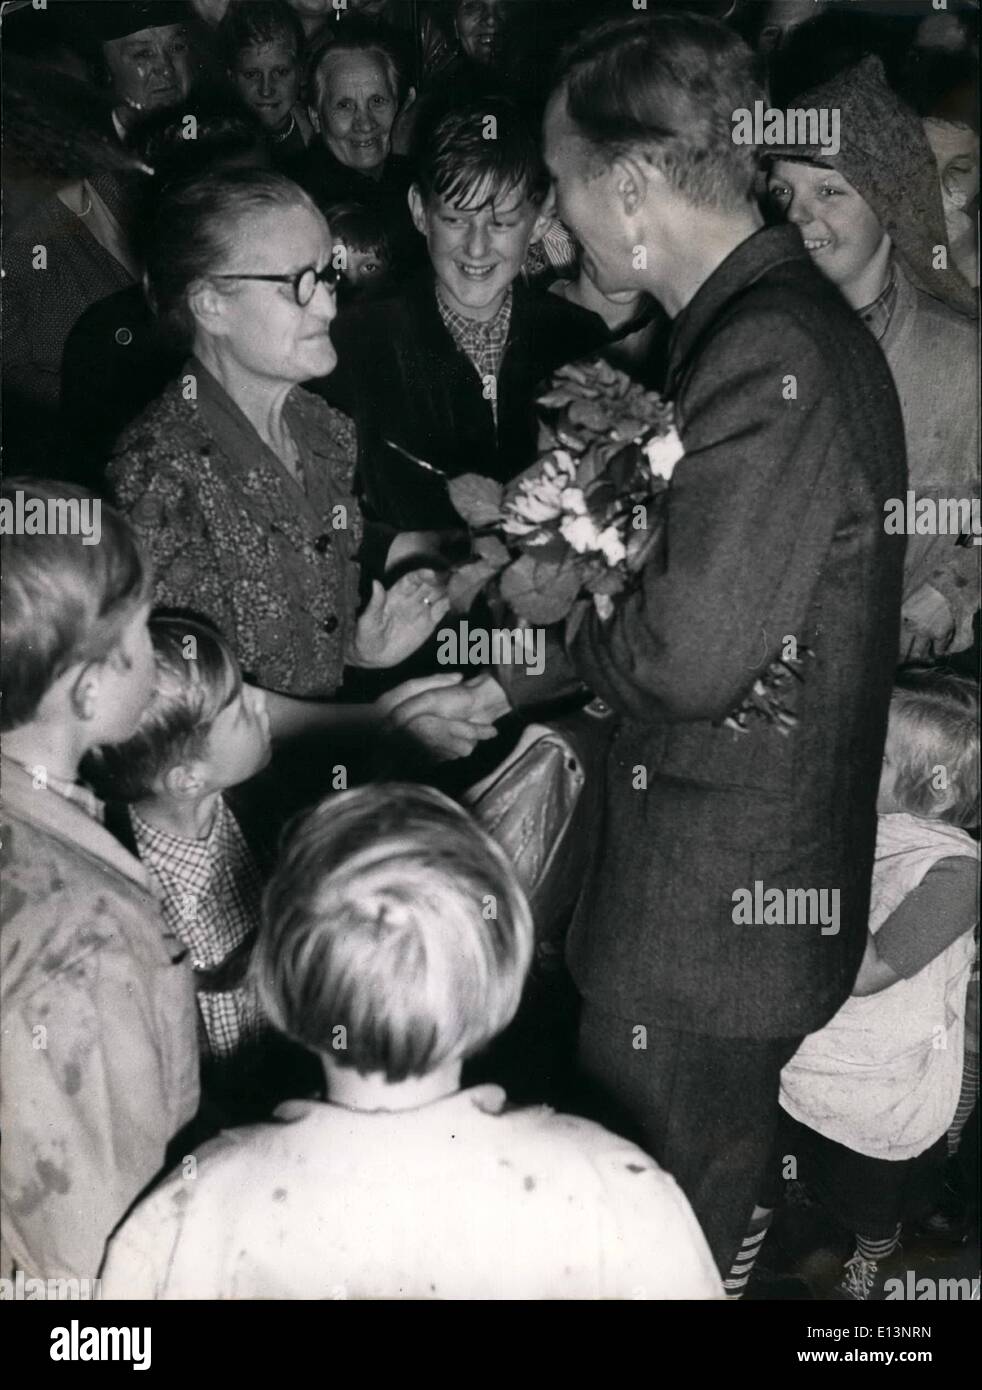 Mar. 22, 2012 - Returning home from Soviet Russia. : Everybody is glad with her Ã¢â‚¬Â¦. After long nine years of waiting and hope her son finally returned home. Stock Photo